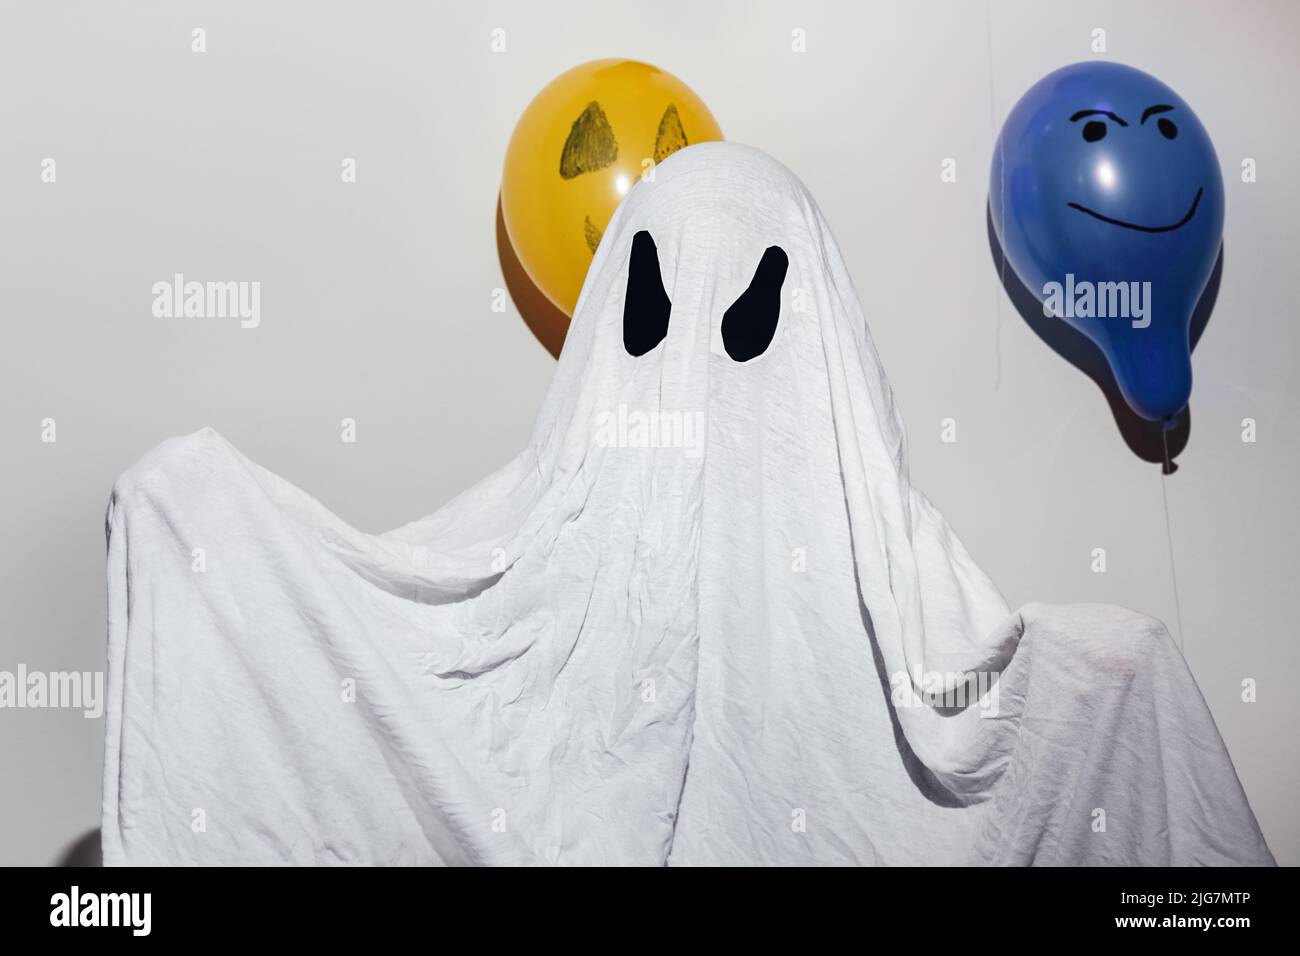 Happy Halloween. A child in a white homemade ghost costume and painted orange and blue balls. Paper eyes. Festive design, party concept. All Saints' Day celebration. Stock Photo